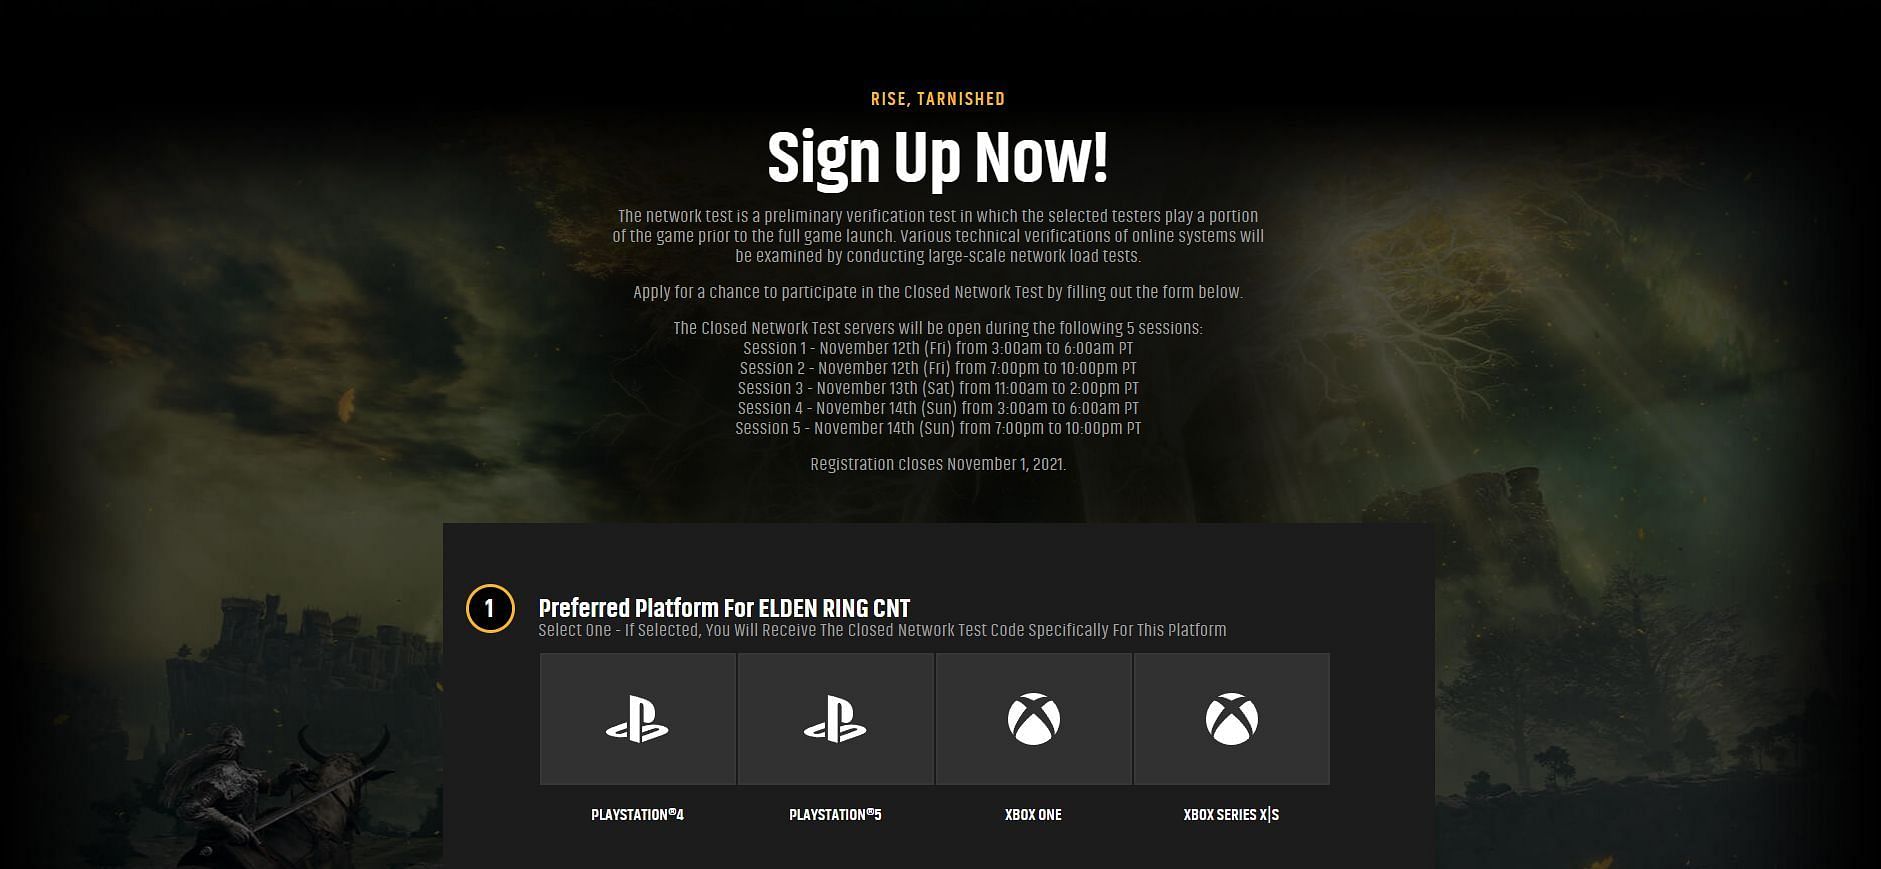 The Elden Ring Closed Network Test sign-up page (Image via Bandai Namco)